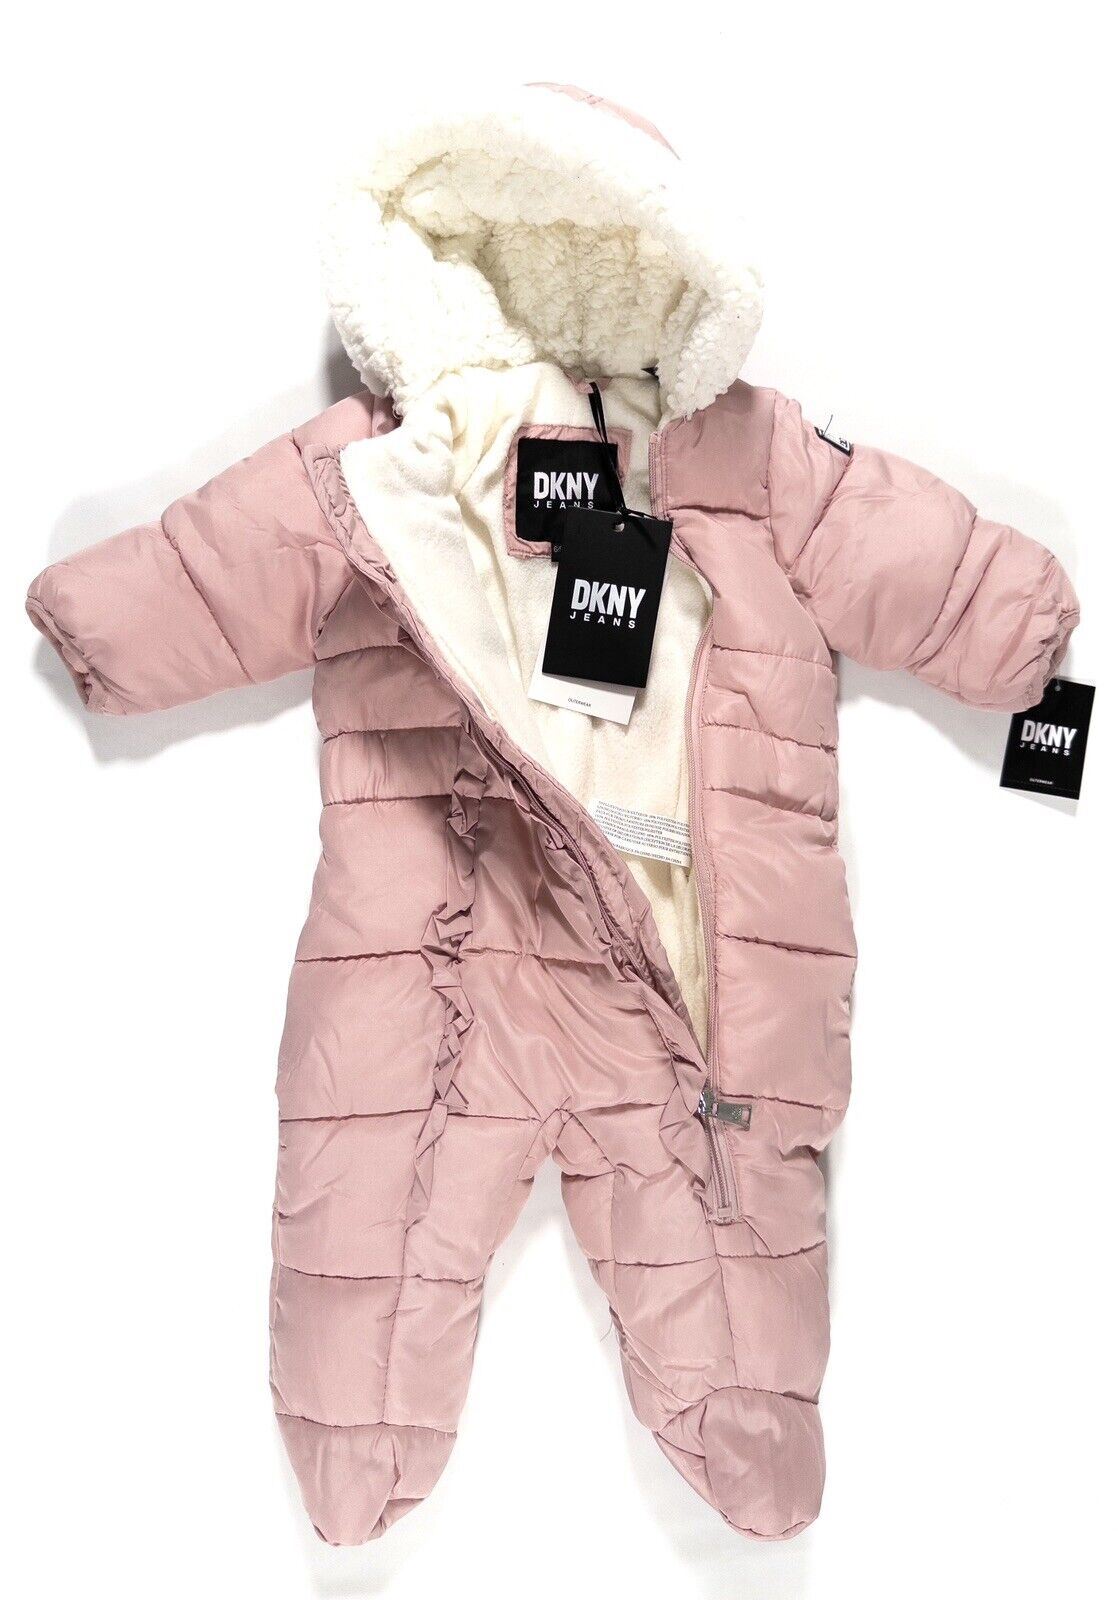 DKNY JEANS Baby Girls Pink Hooded Snowsuit All in one Size UK 6-9 Months